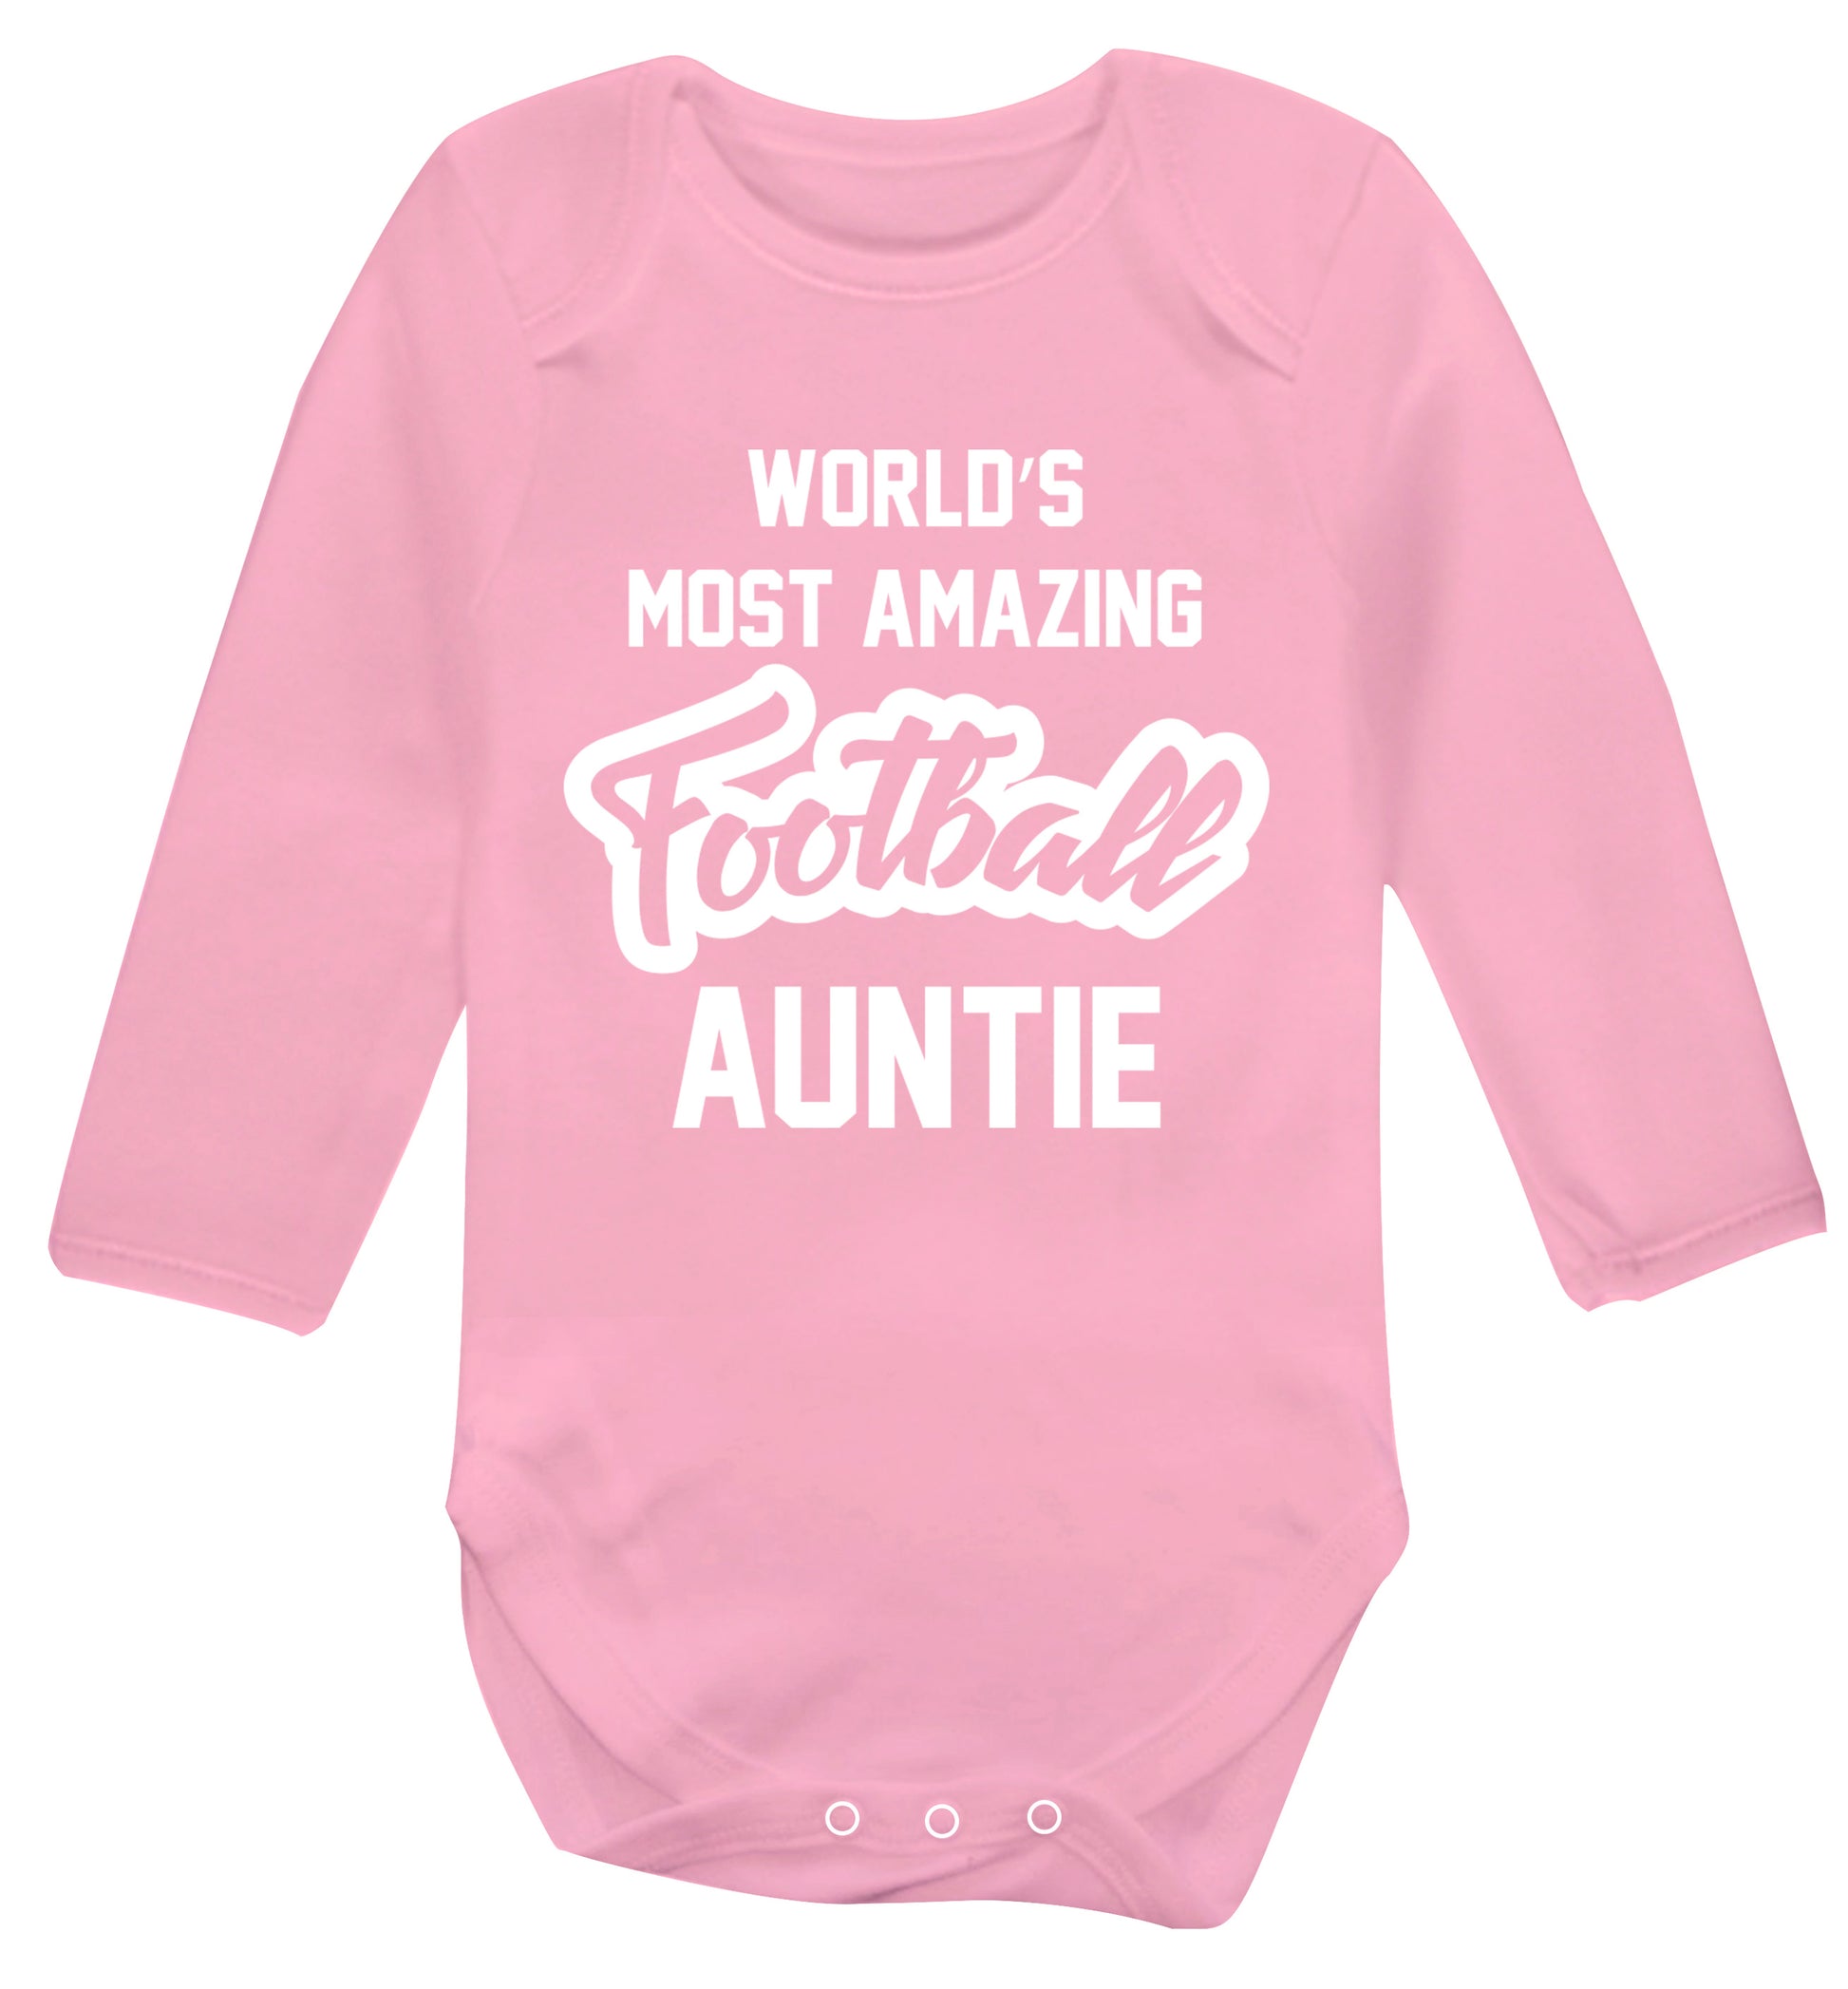 Worlds most amazing football auntie Baby Vest long sleeved pale pink 6-12 months